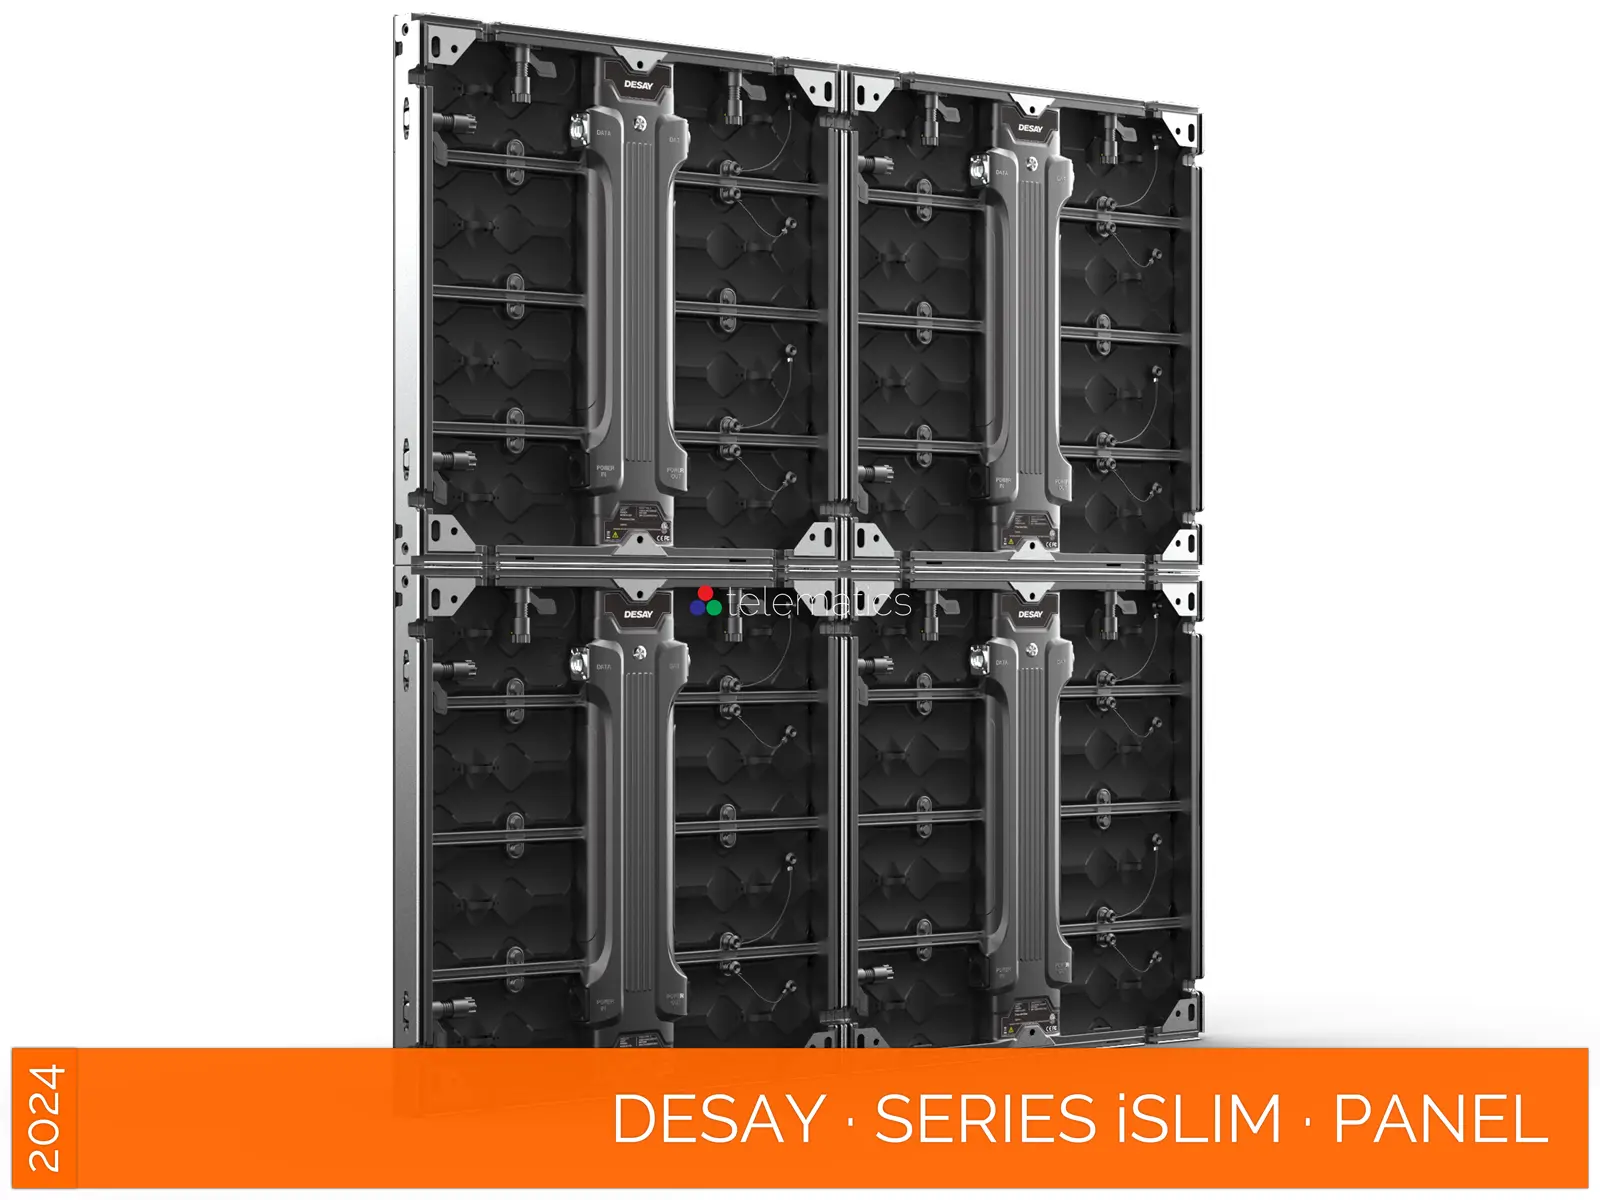 Desay · Series iSlim · Direct View LED Display Panel · Full Pixel Range · Installation Or Exhibit · Aluminum Extrusion Frame · Indoor Rated · Easy Front Service · Power Box · NovaStar COEX MX CX · Vision Management Platform · Viplex · review · price · cost · priced from $ 1,399 per square meter